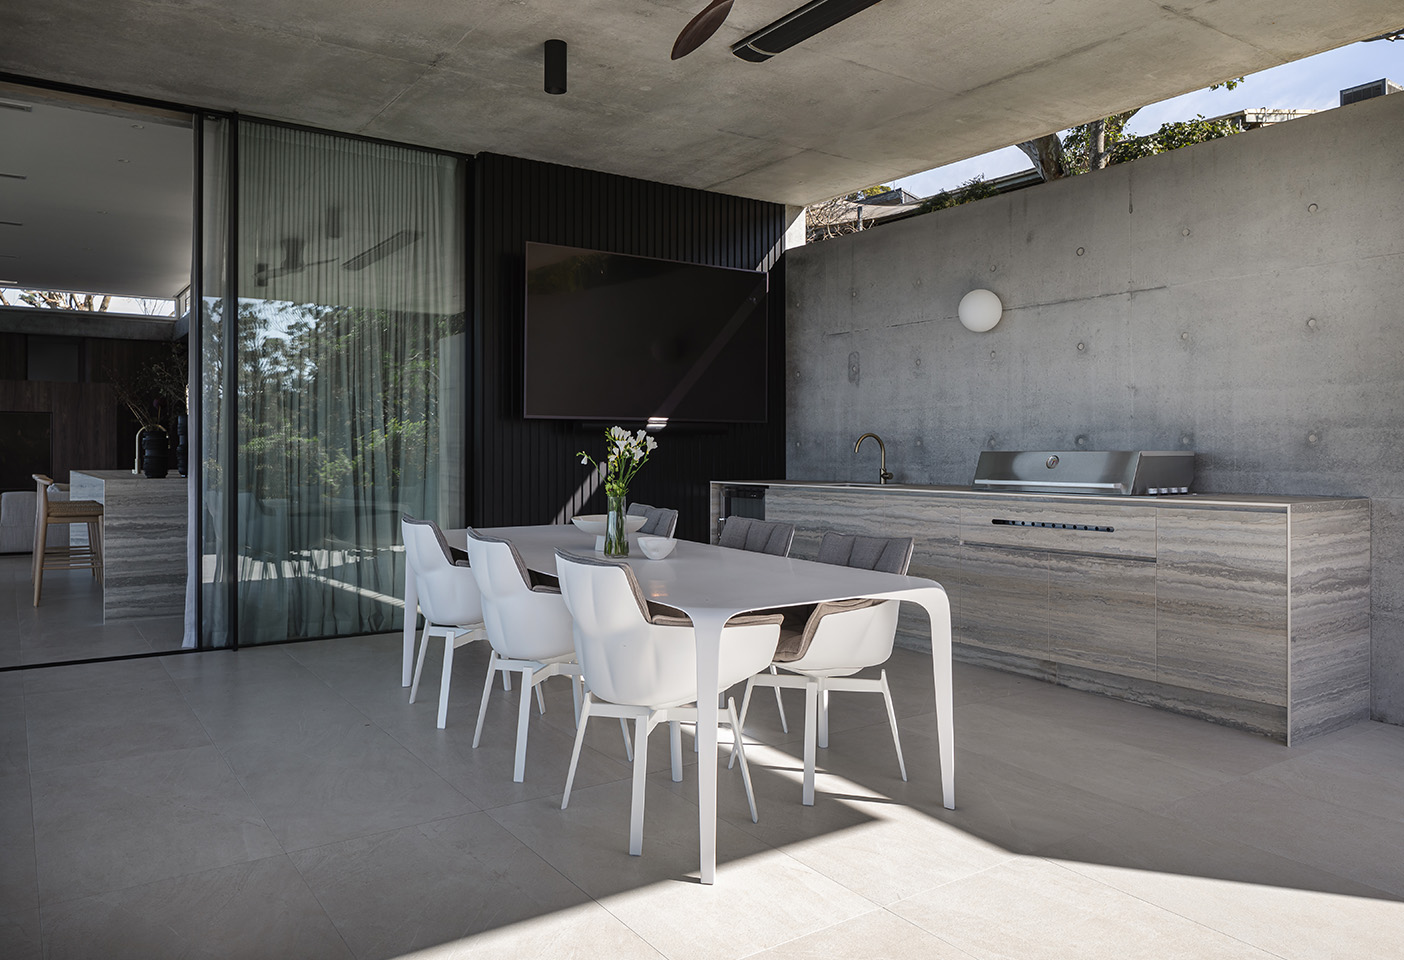 The outdoor dining area features the Link table by Jakob Wagner and Husk chairs by Patricia Urquiola, both for B&B Italia. Photo © Cam Murchison.